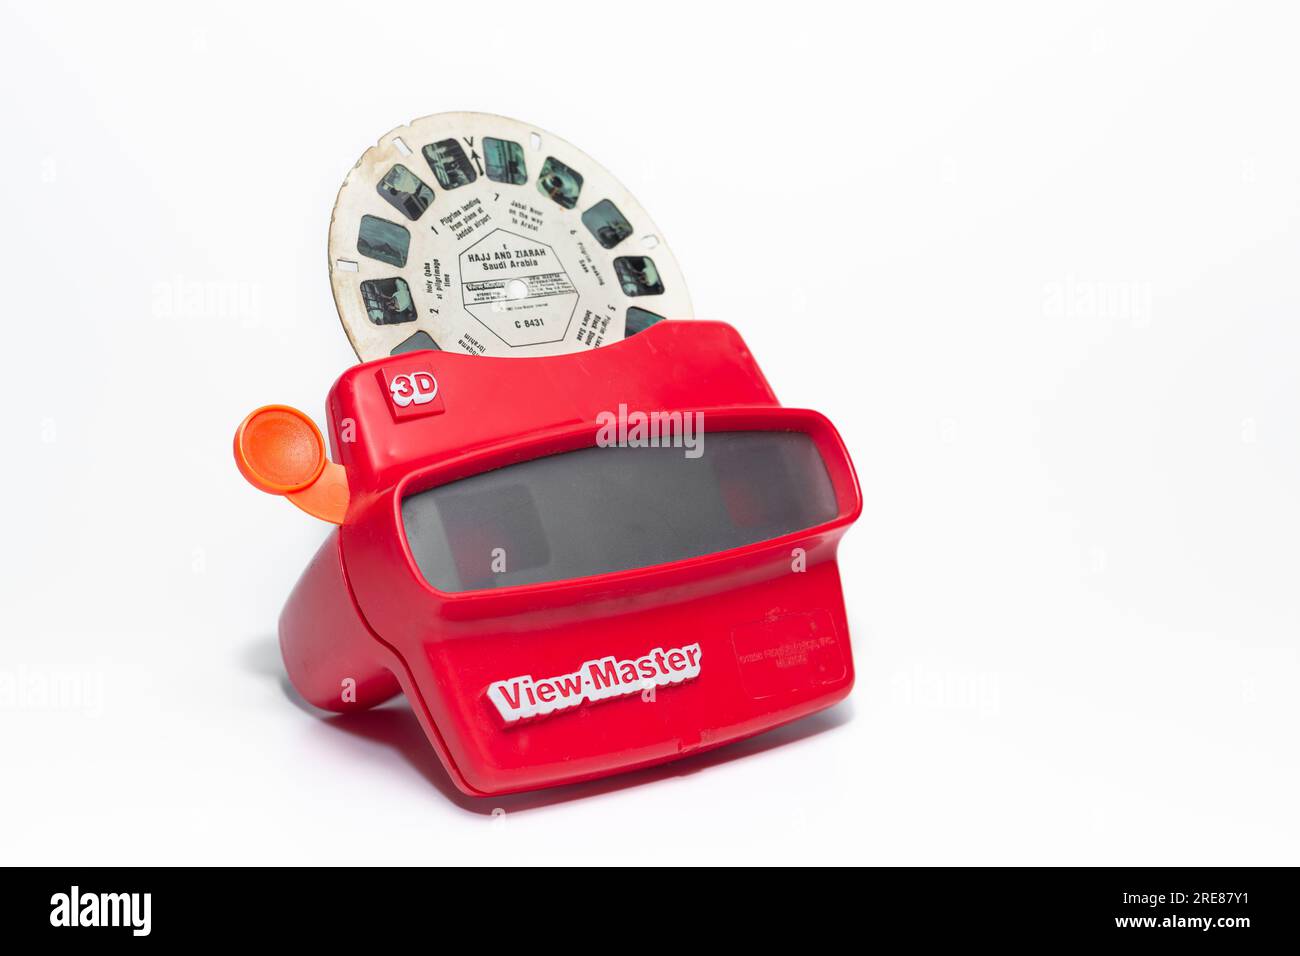 View master hi-res stock photography and images - Alamy